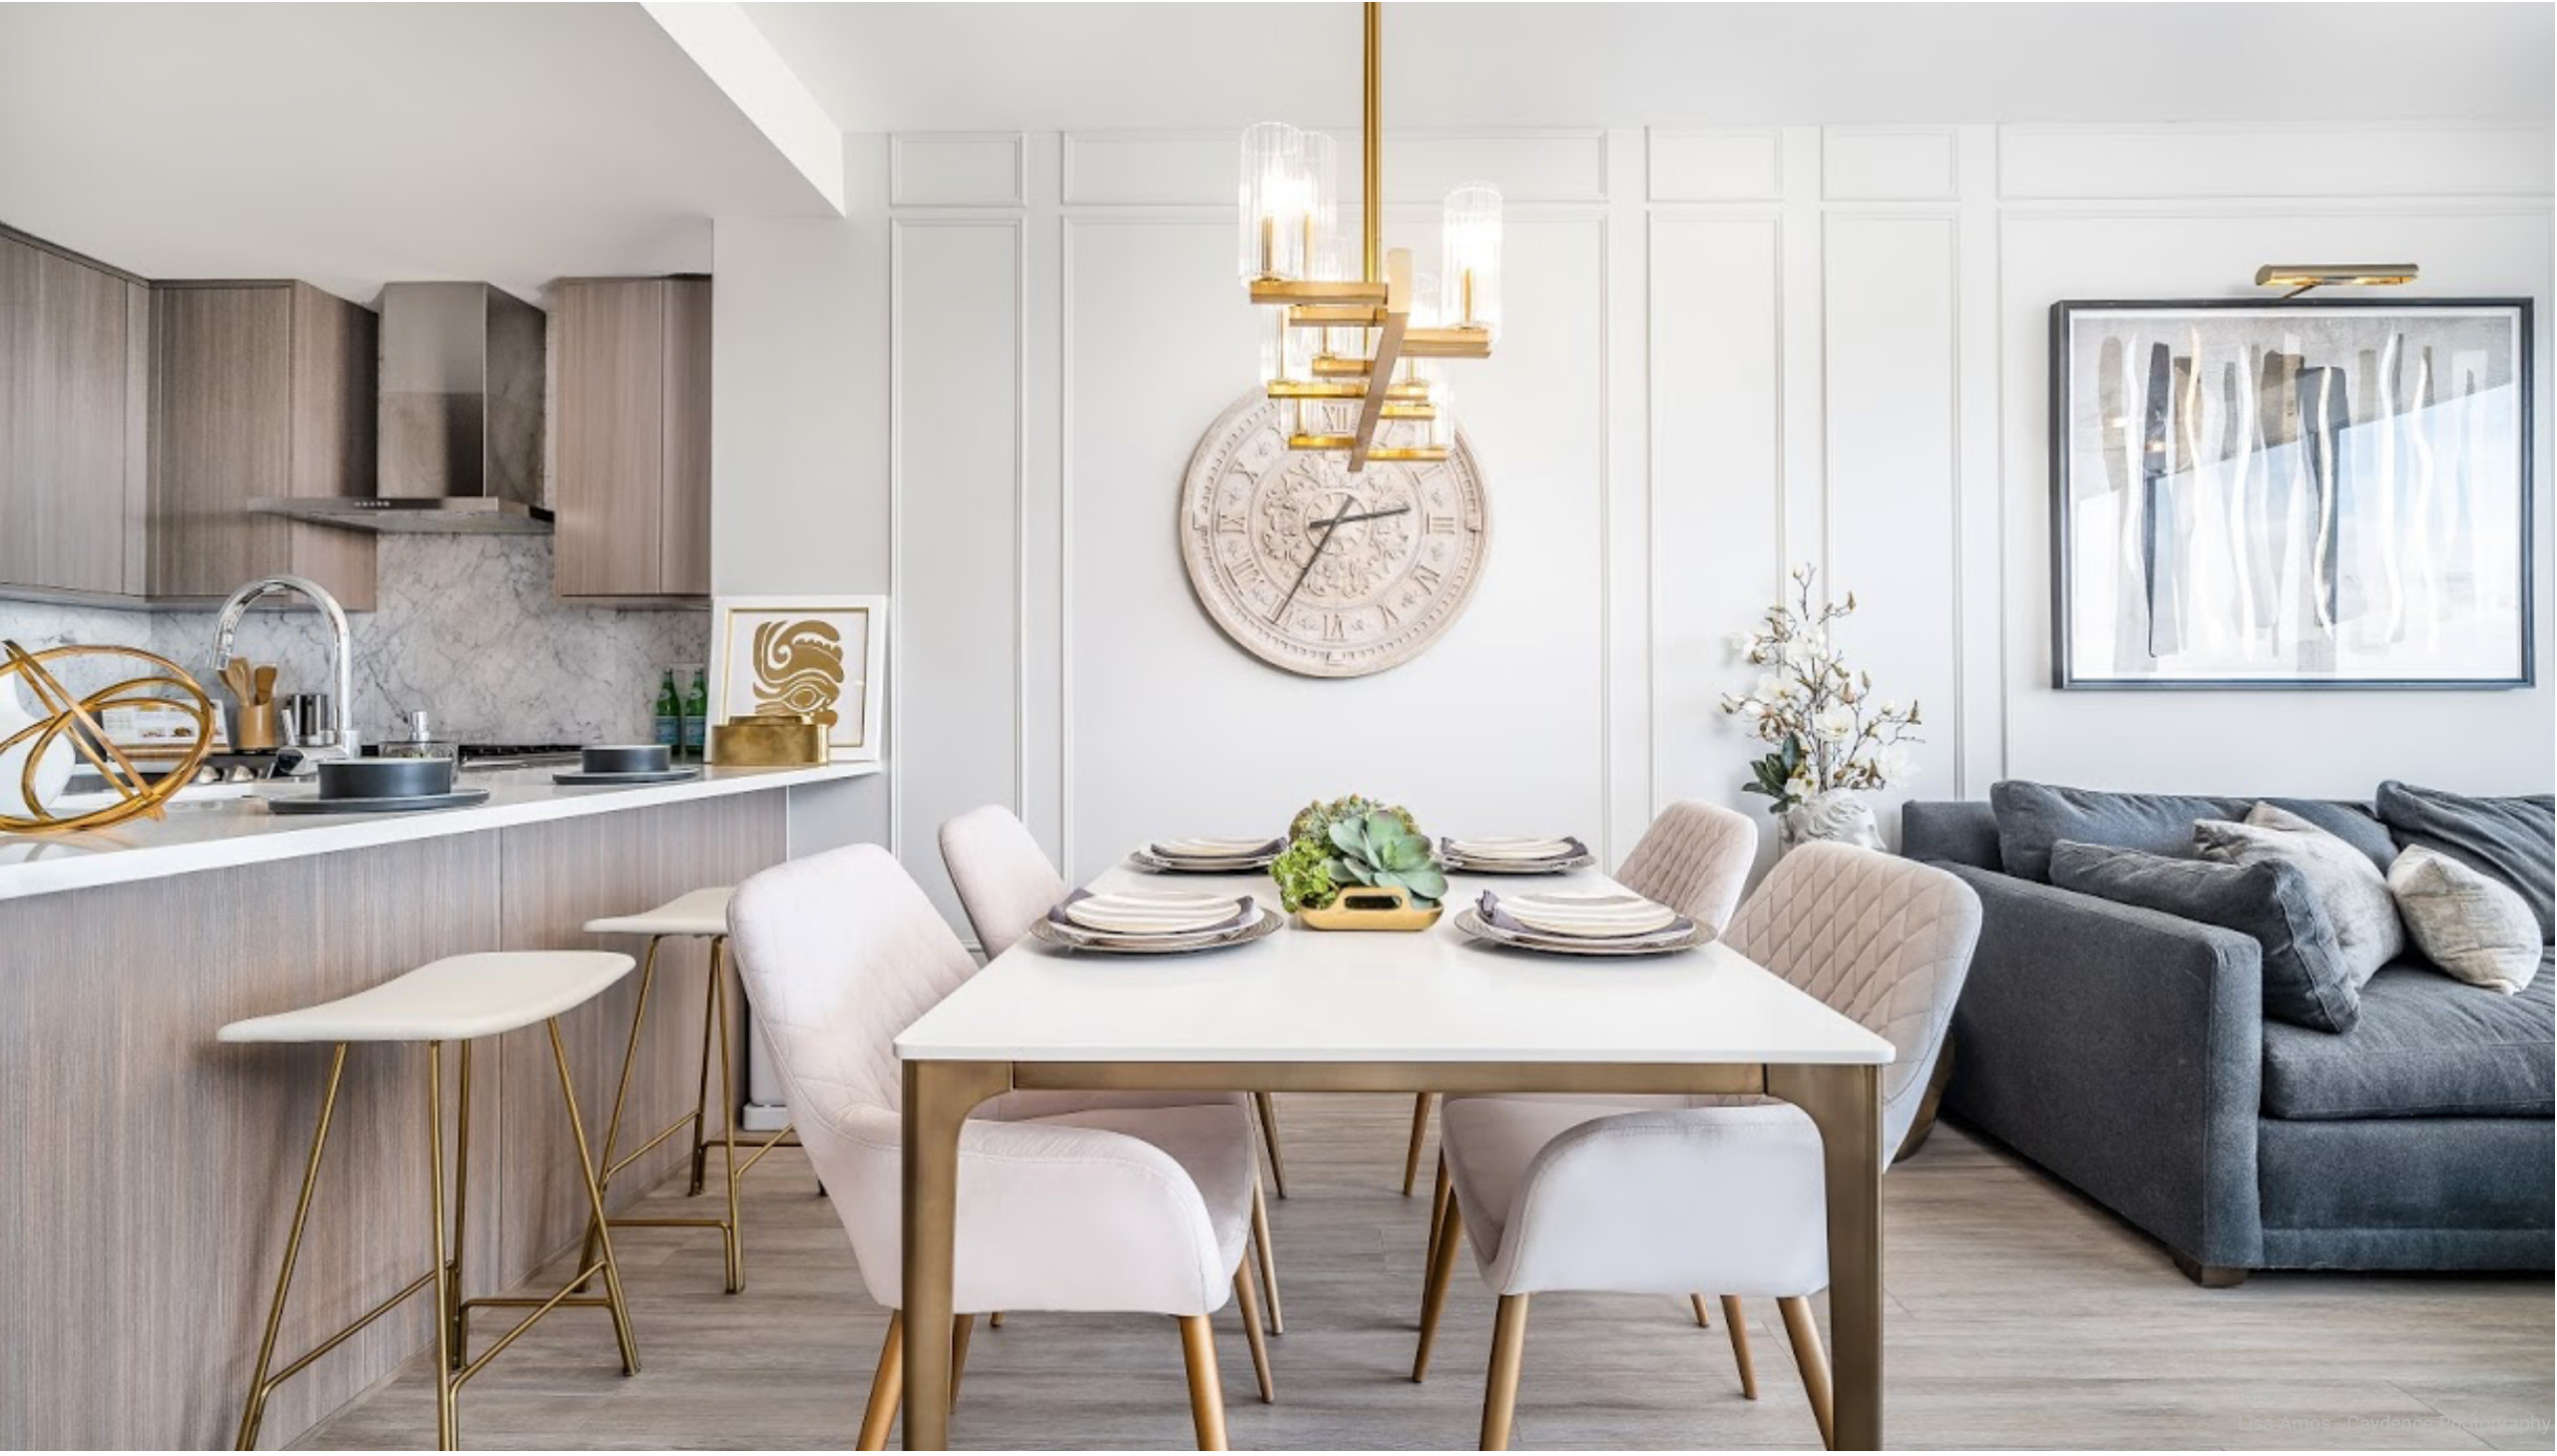 This 600 S.F. condo evokes a sense of eclectic glamour with touches of warm metals, faux fur, and velvets accents. Space planning and careful balancing of scale is crucial for such a small space, when